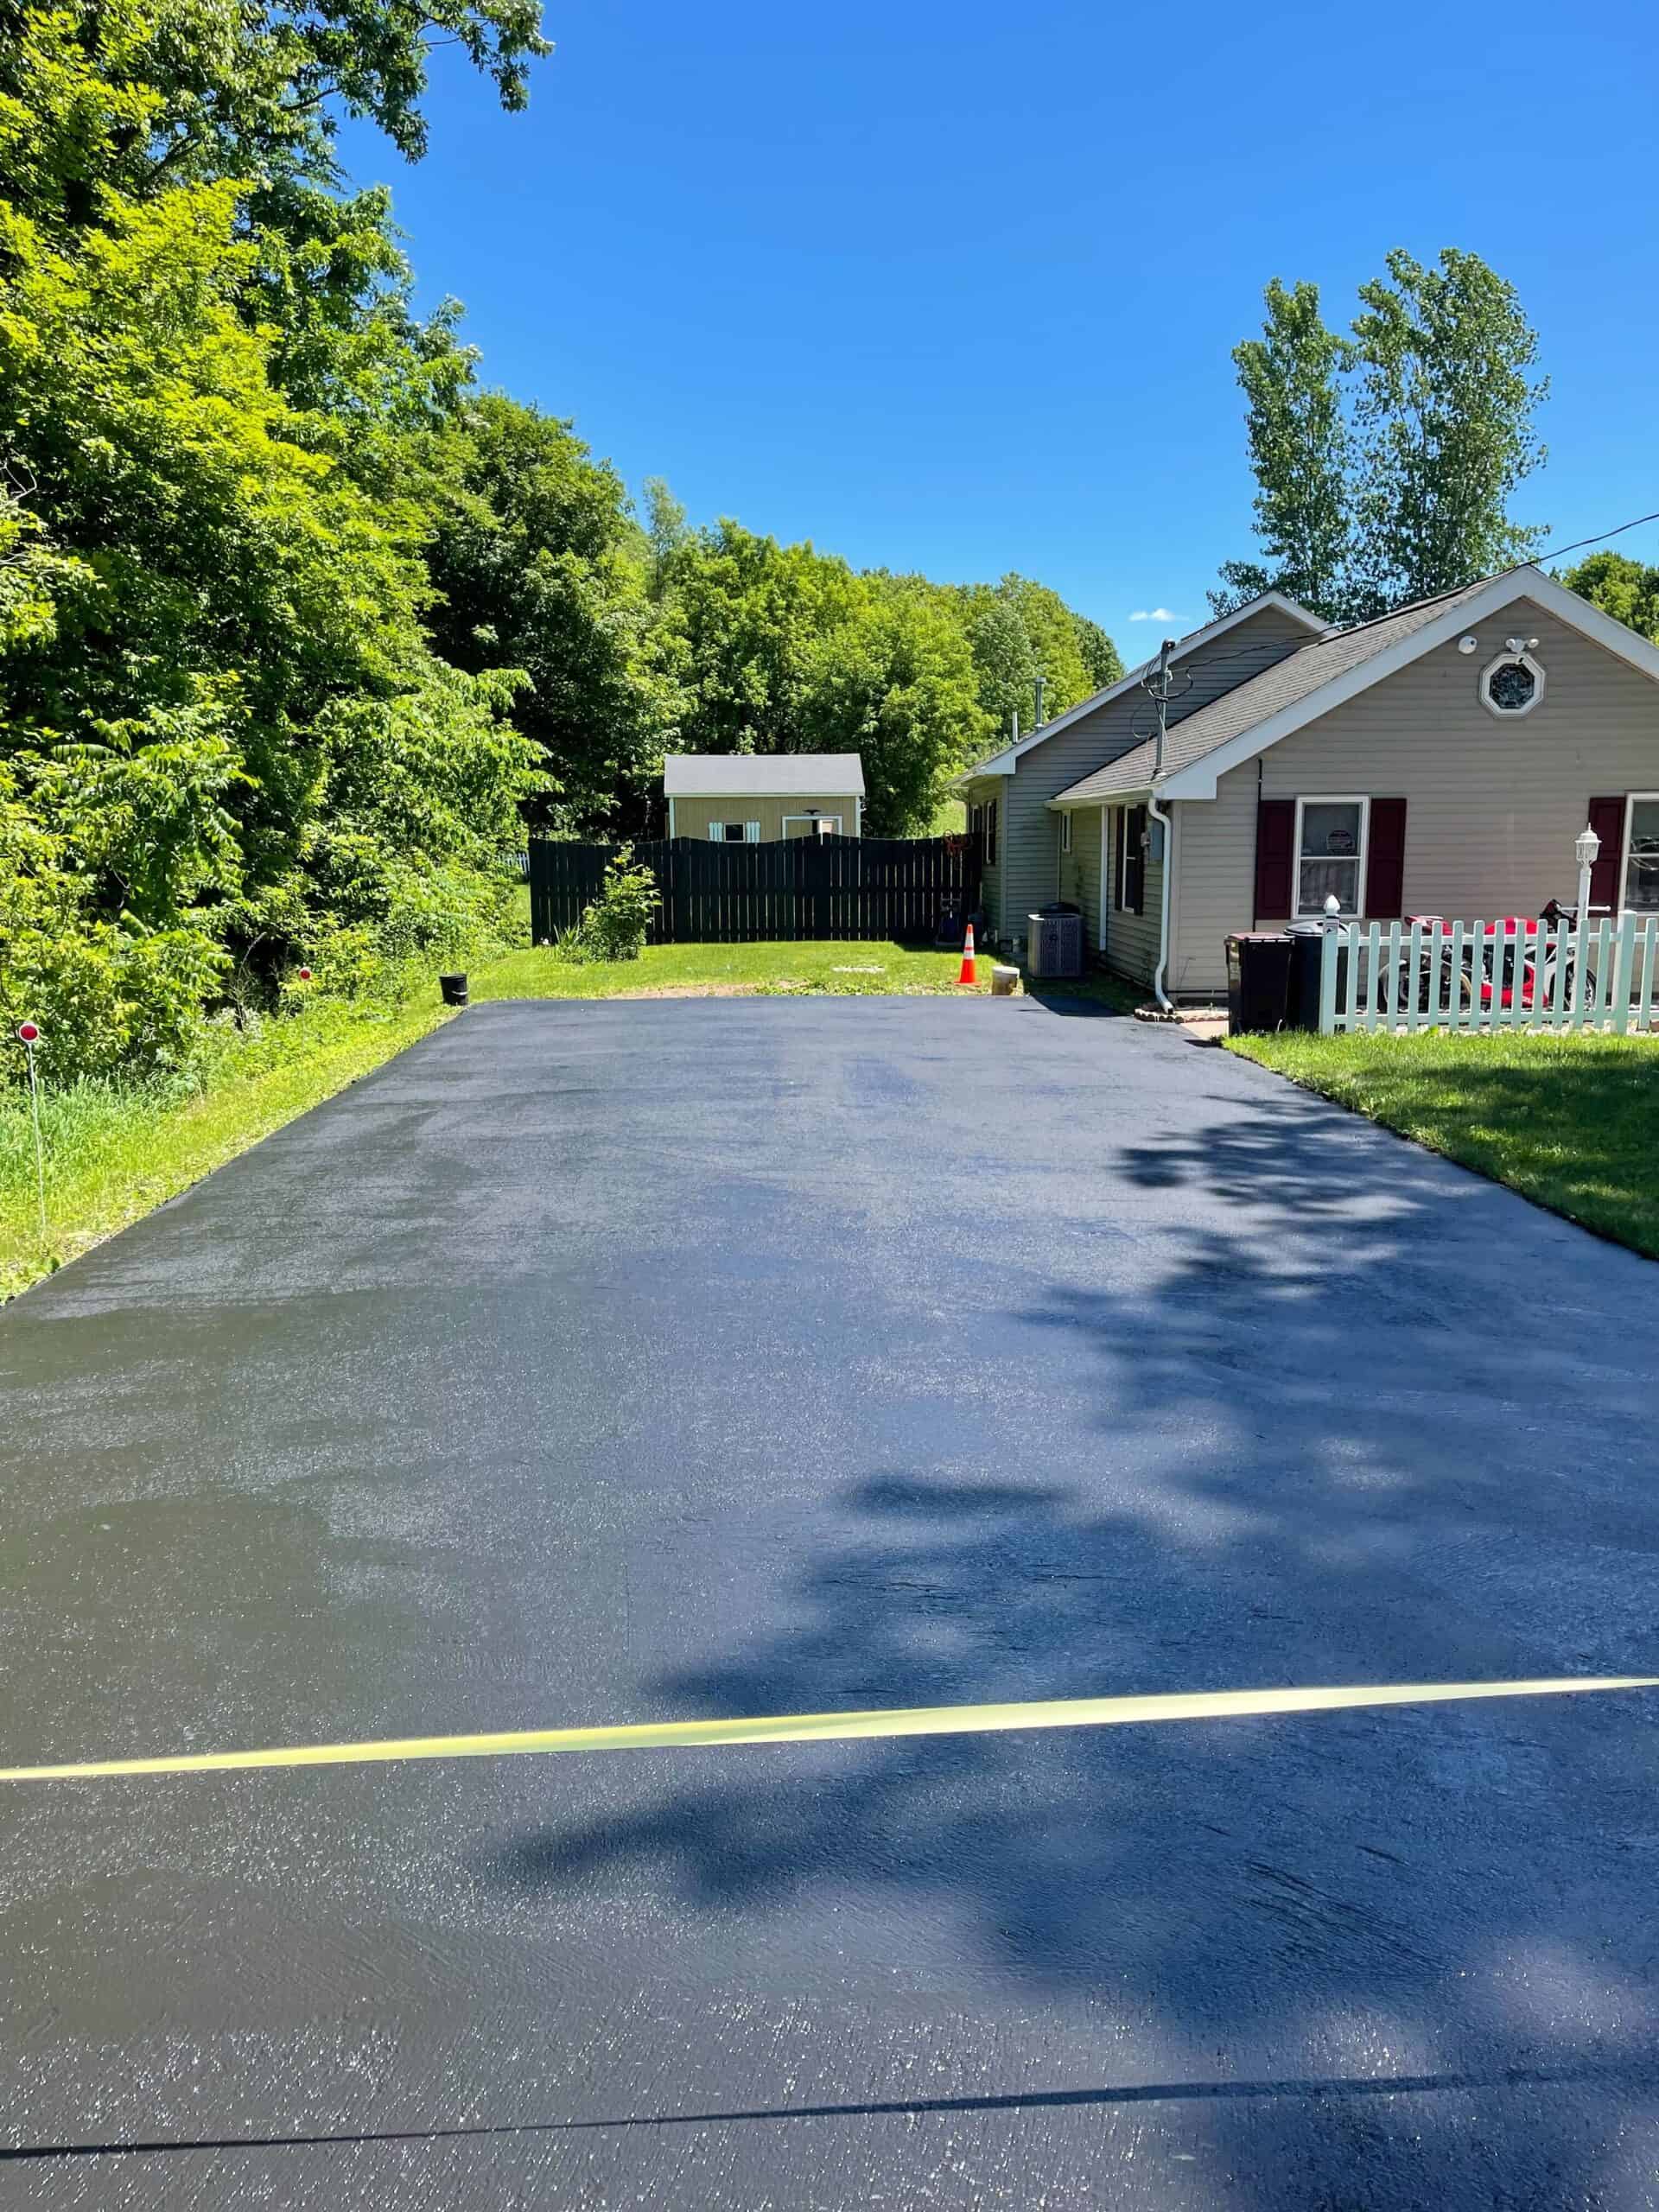 a rectangular asphalt driveway with sealcoating applied to the surface for drying in the sun